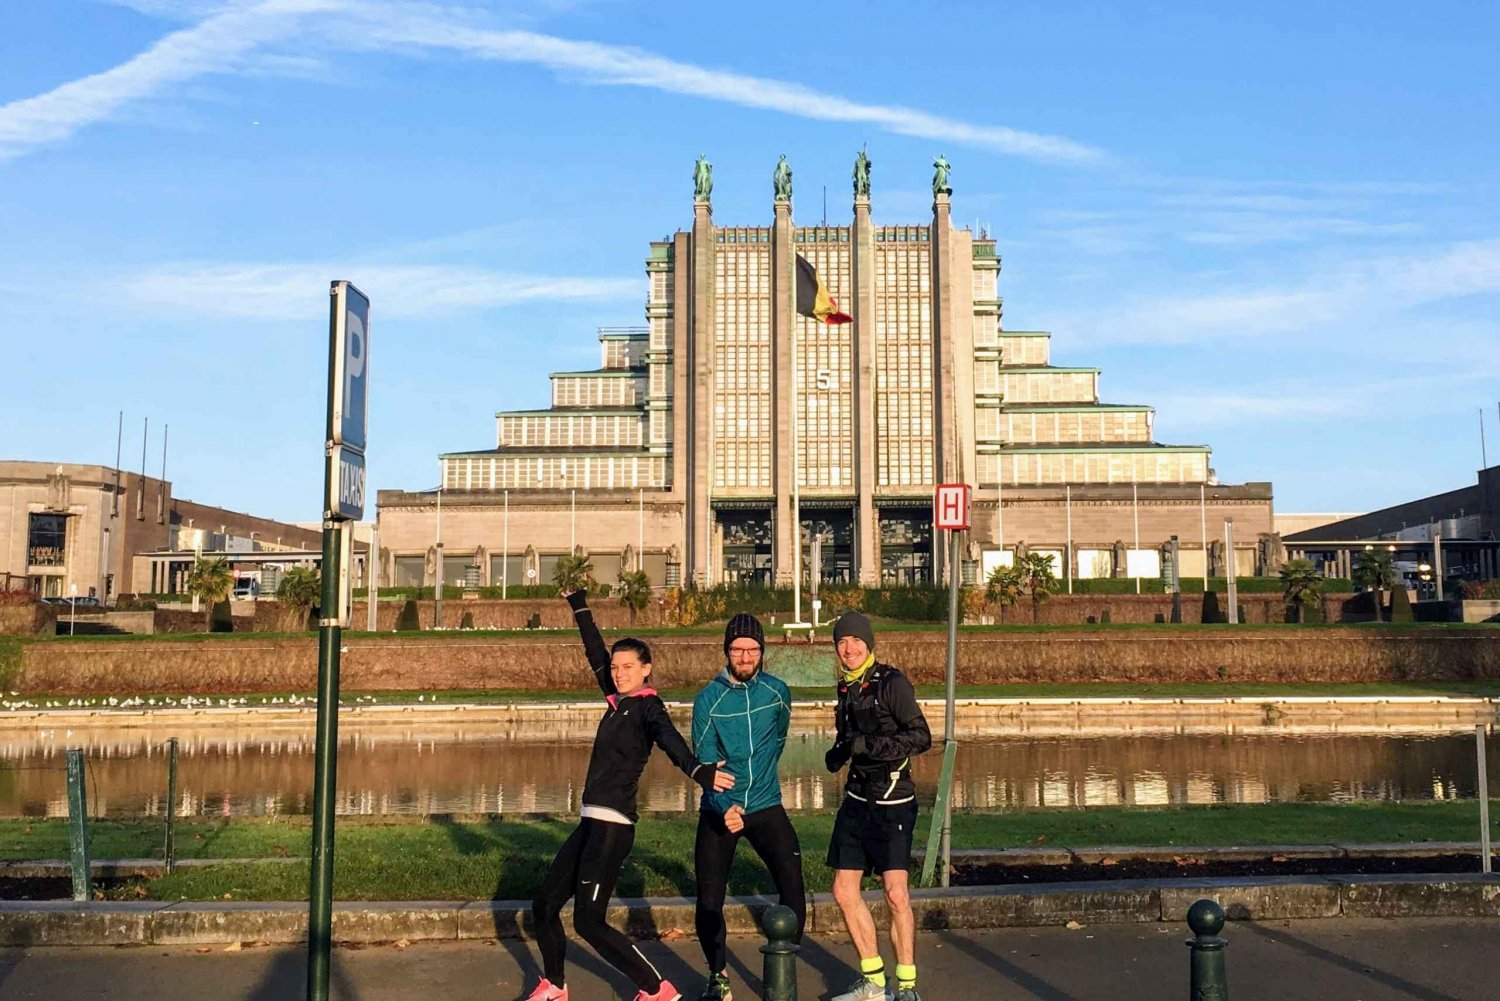 SightJogging: Atomium, green parks and Belgian history